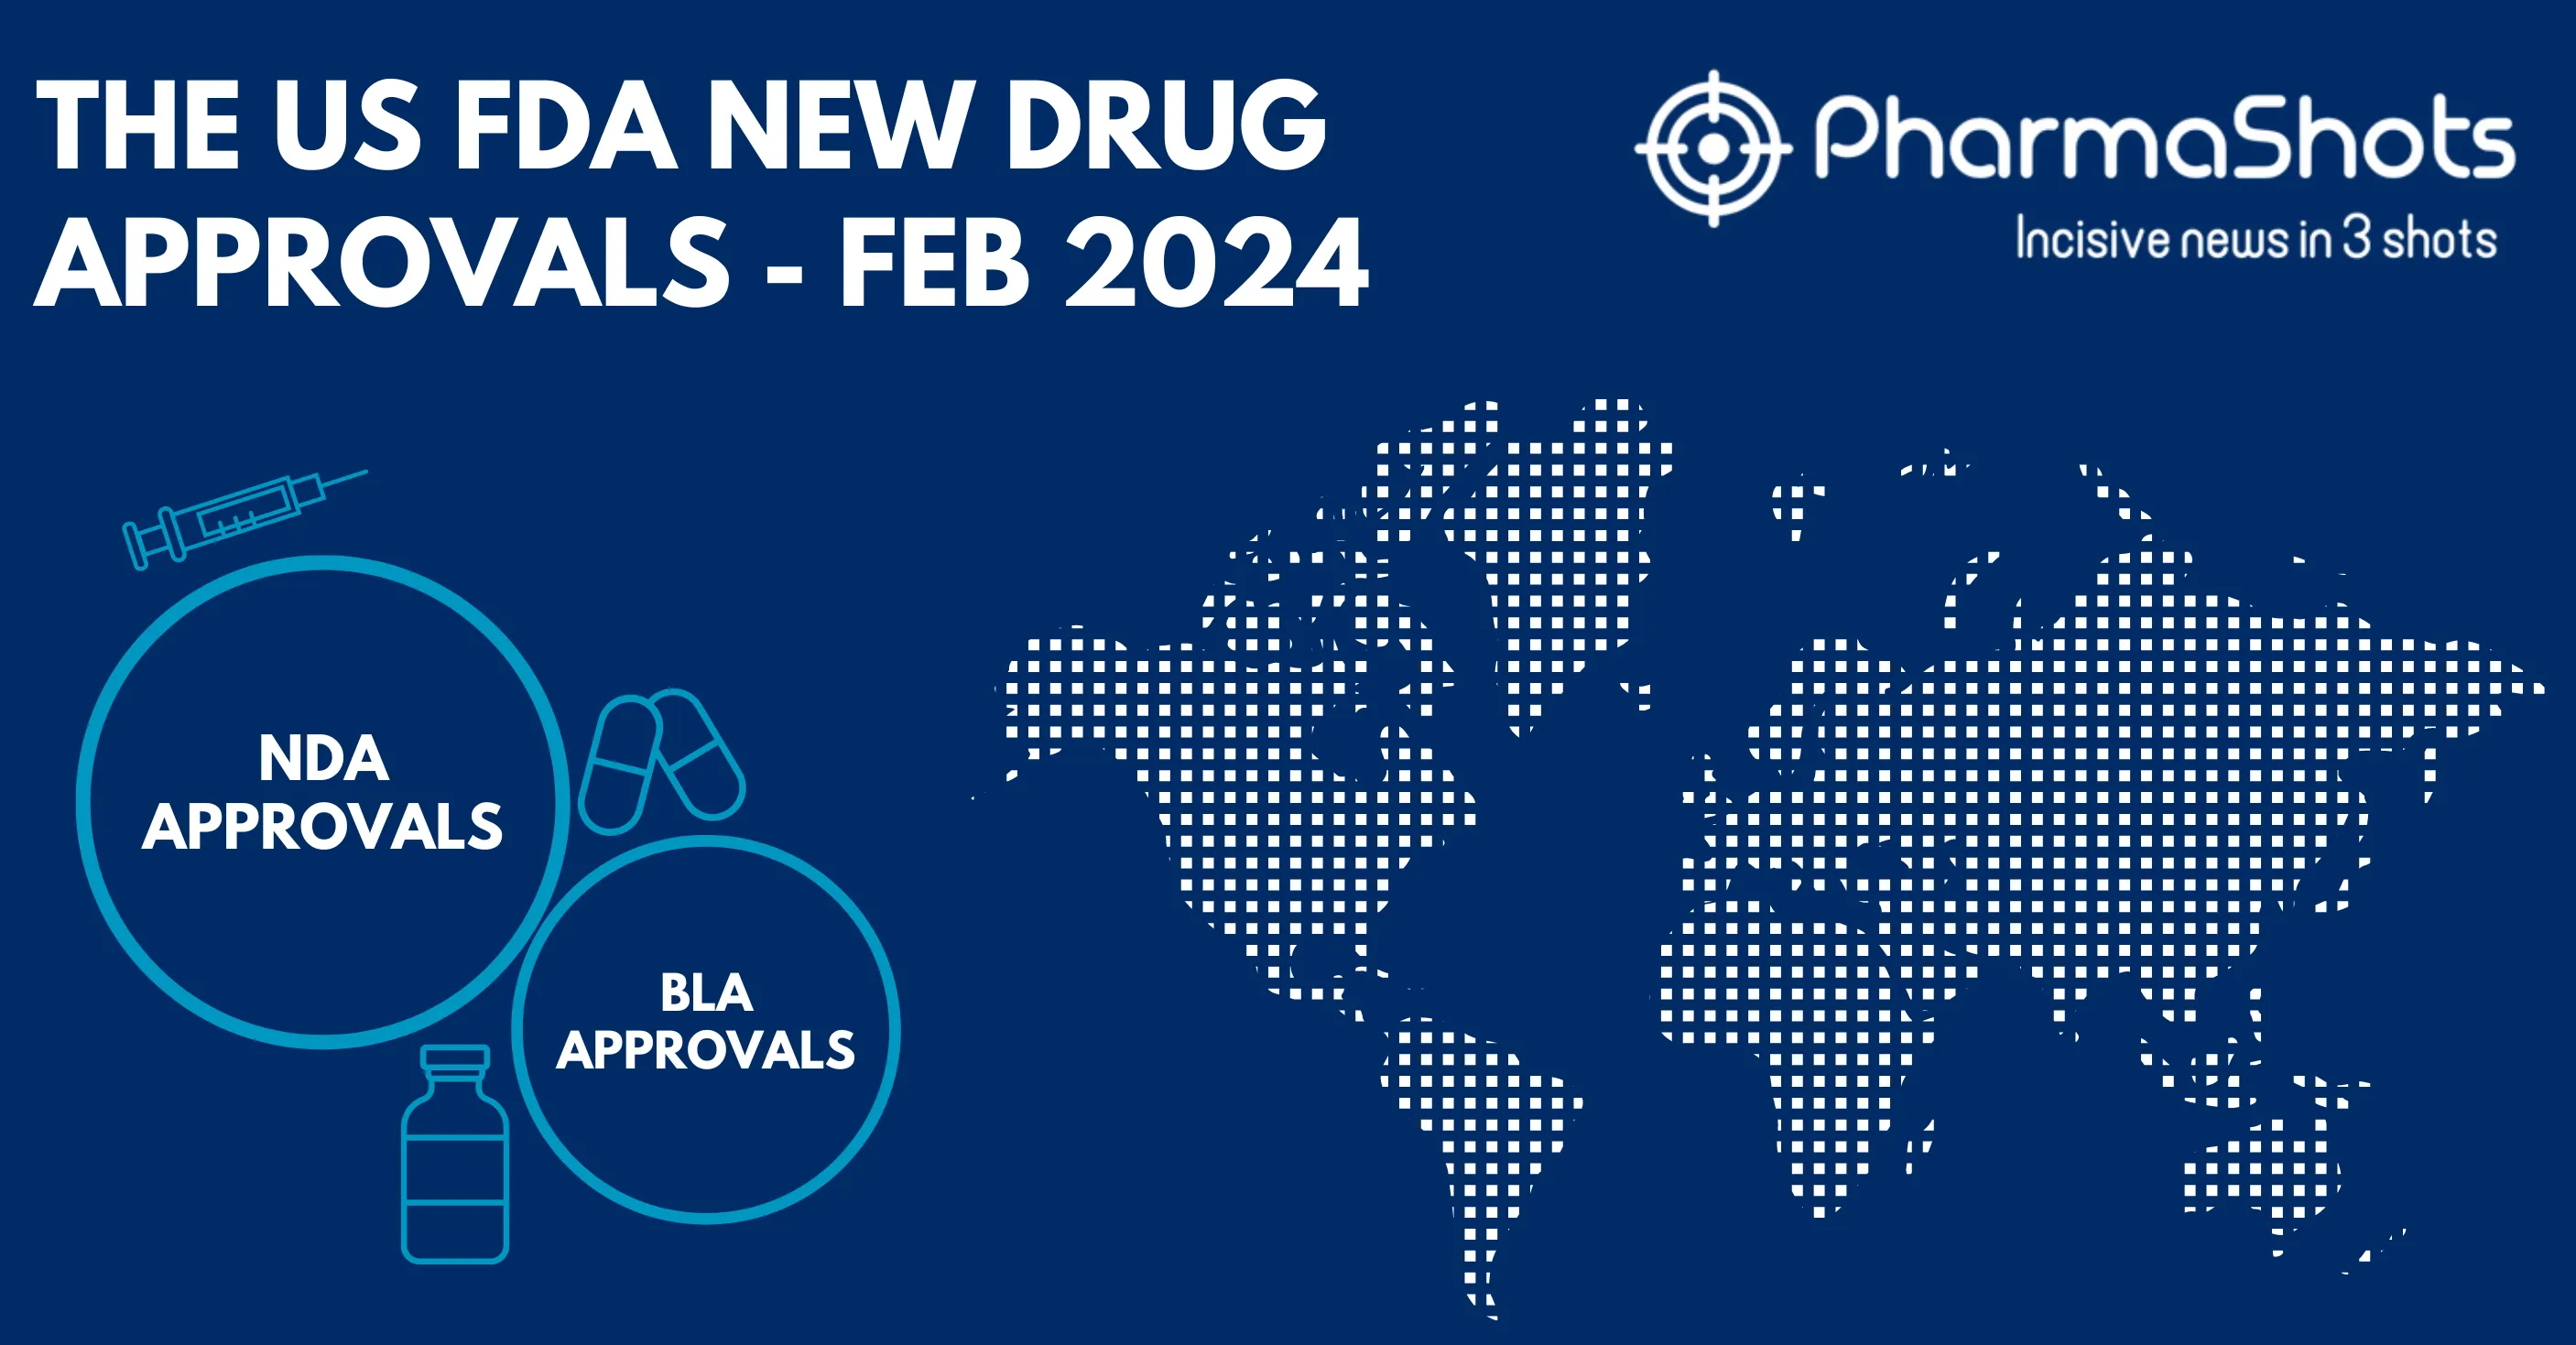 Insights+: The US FDA New Drug Approvals in February 2024